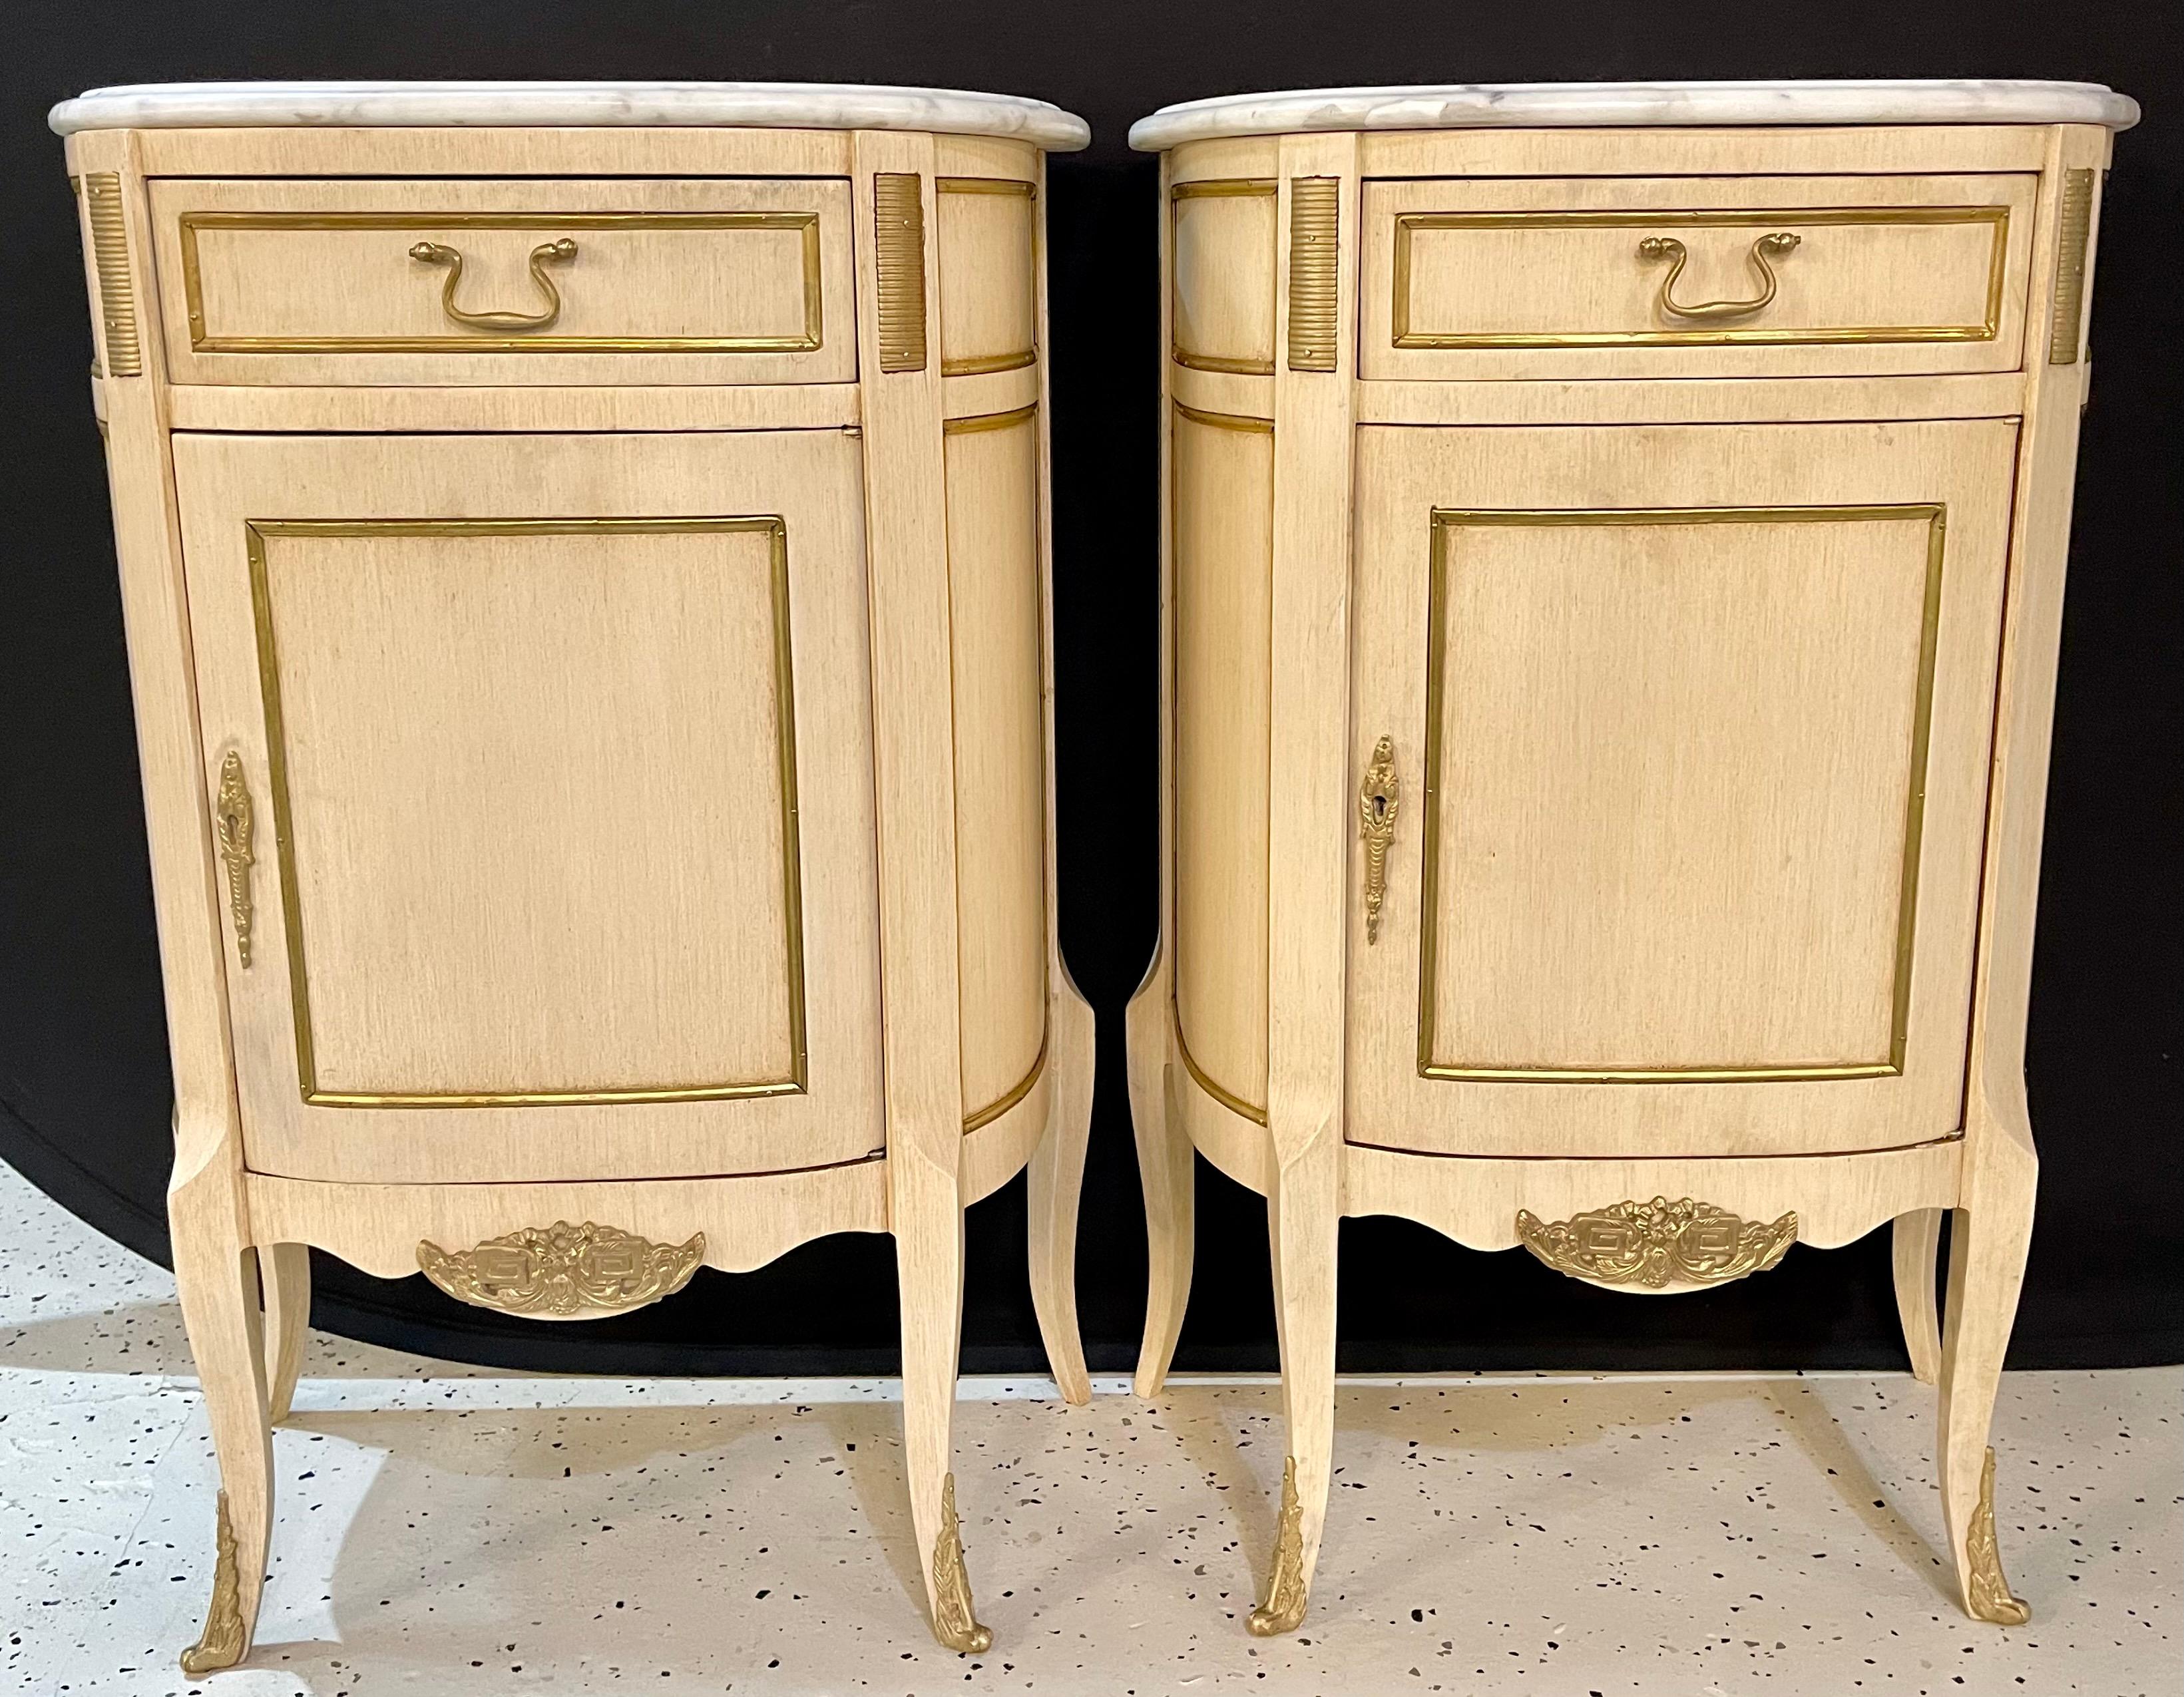 Hand-Painted Hollywood Regency Painted End Tables, Nightstands or Pedestals, a Pair